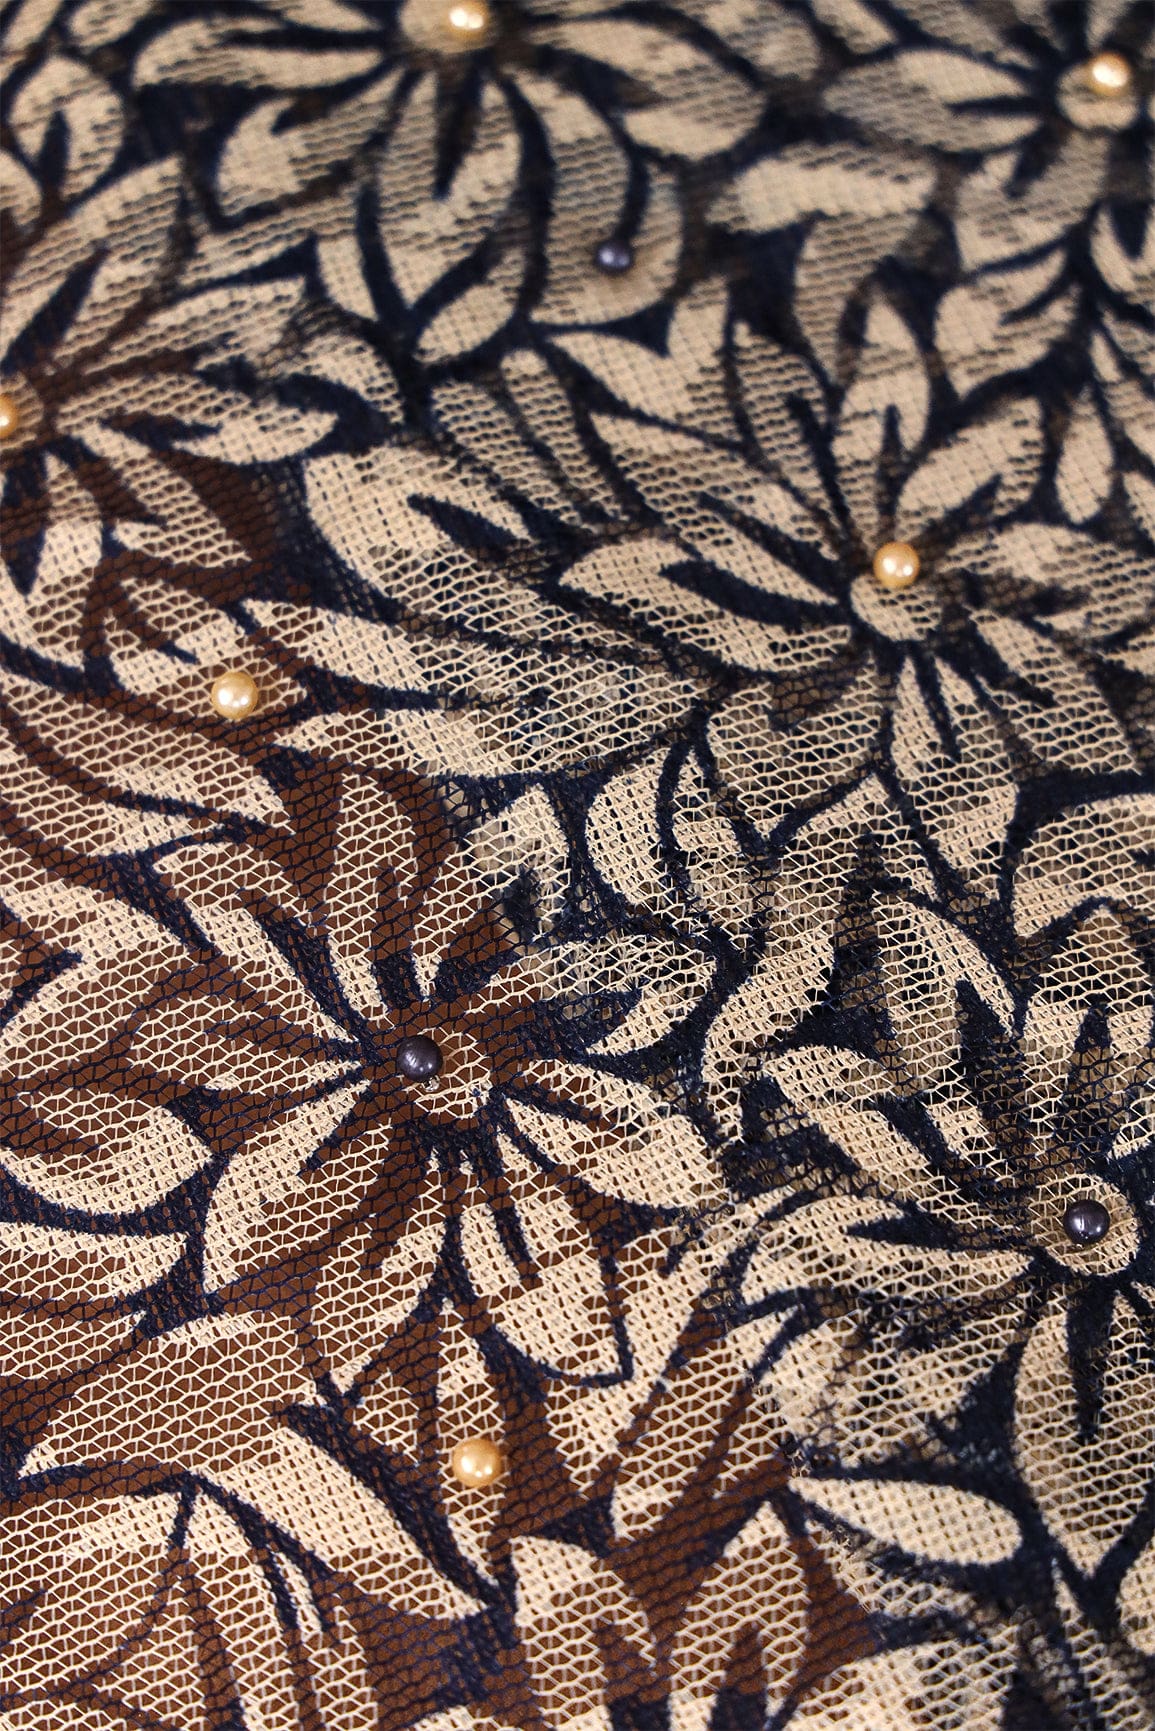 net fabric for dupatta,embroidered net fabric wholesale,golden embroidered net fabric,golden embroidery fabric,silk net fabric,net fabric for blouse,net fabric pricev